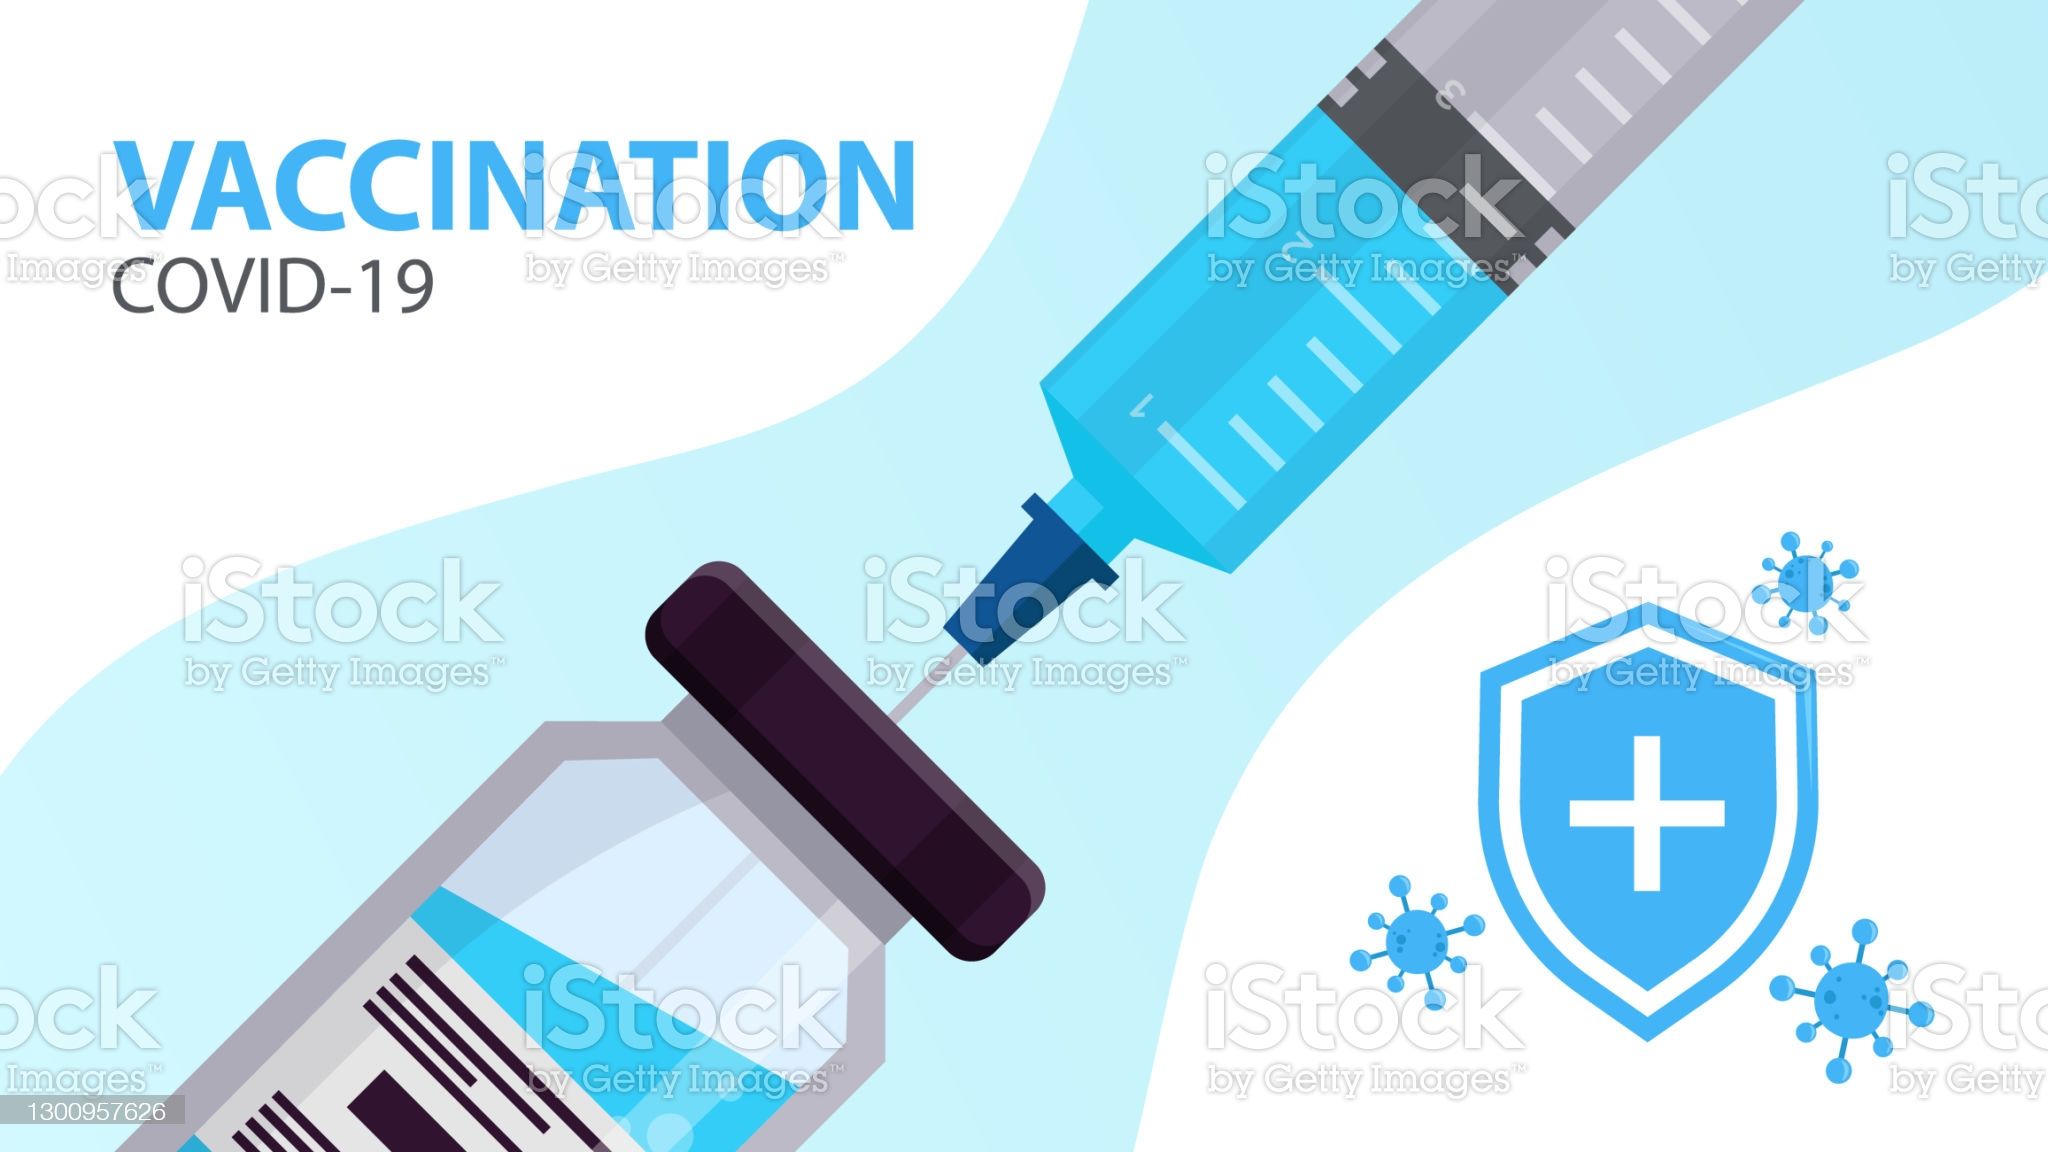 Coronavirus vaccination banner. Covid-19 prevention. Syringe with needle and vaccine bottle. Safety measure during coronavirus. Vector illustration.